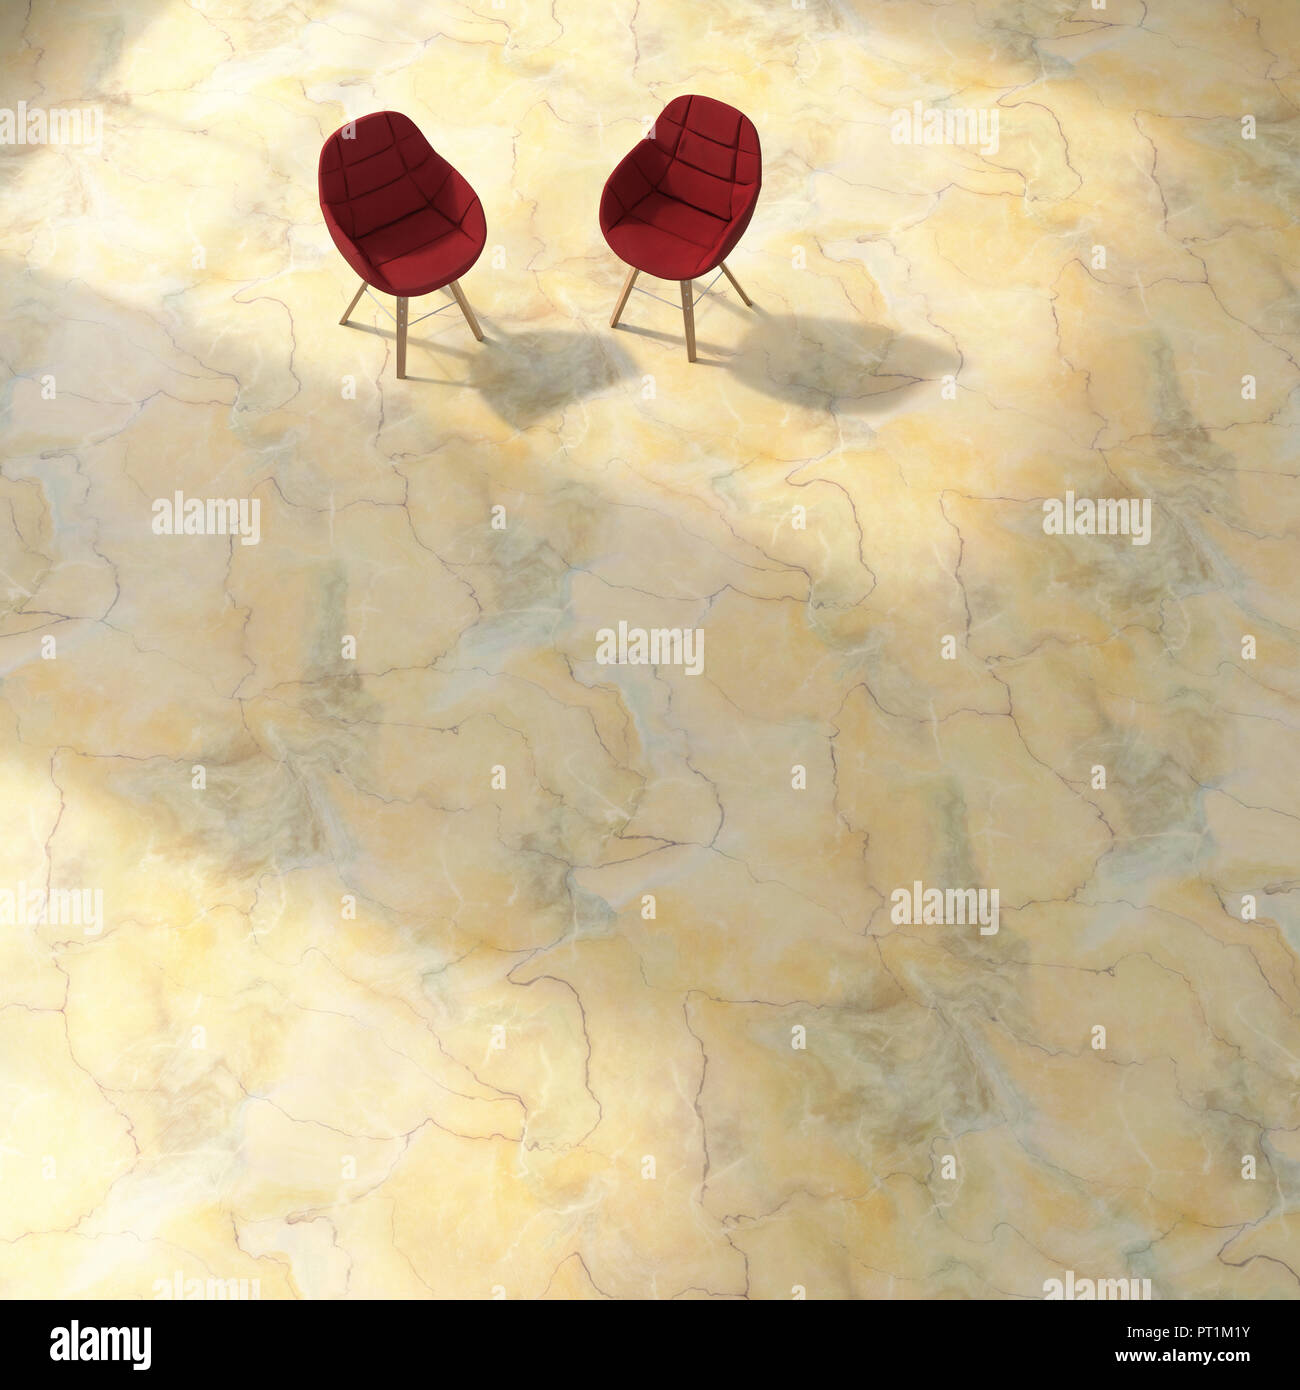 3D rendering, Two chairs on structured floor Stock Photo